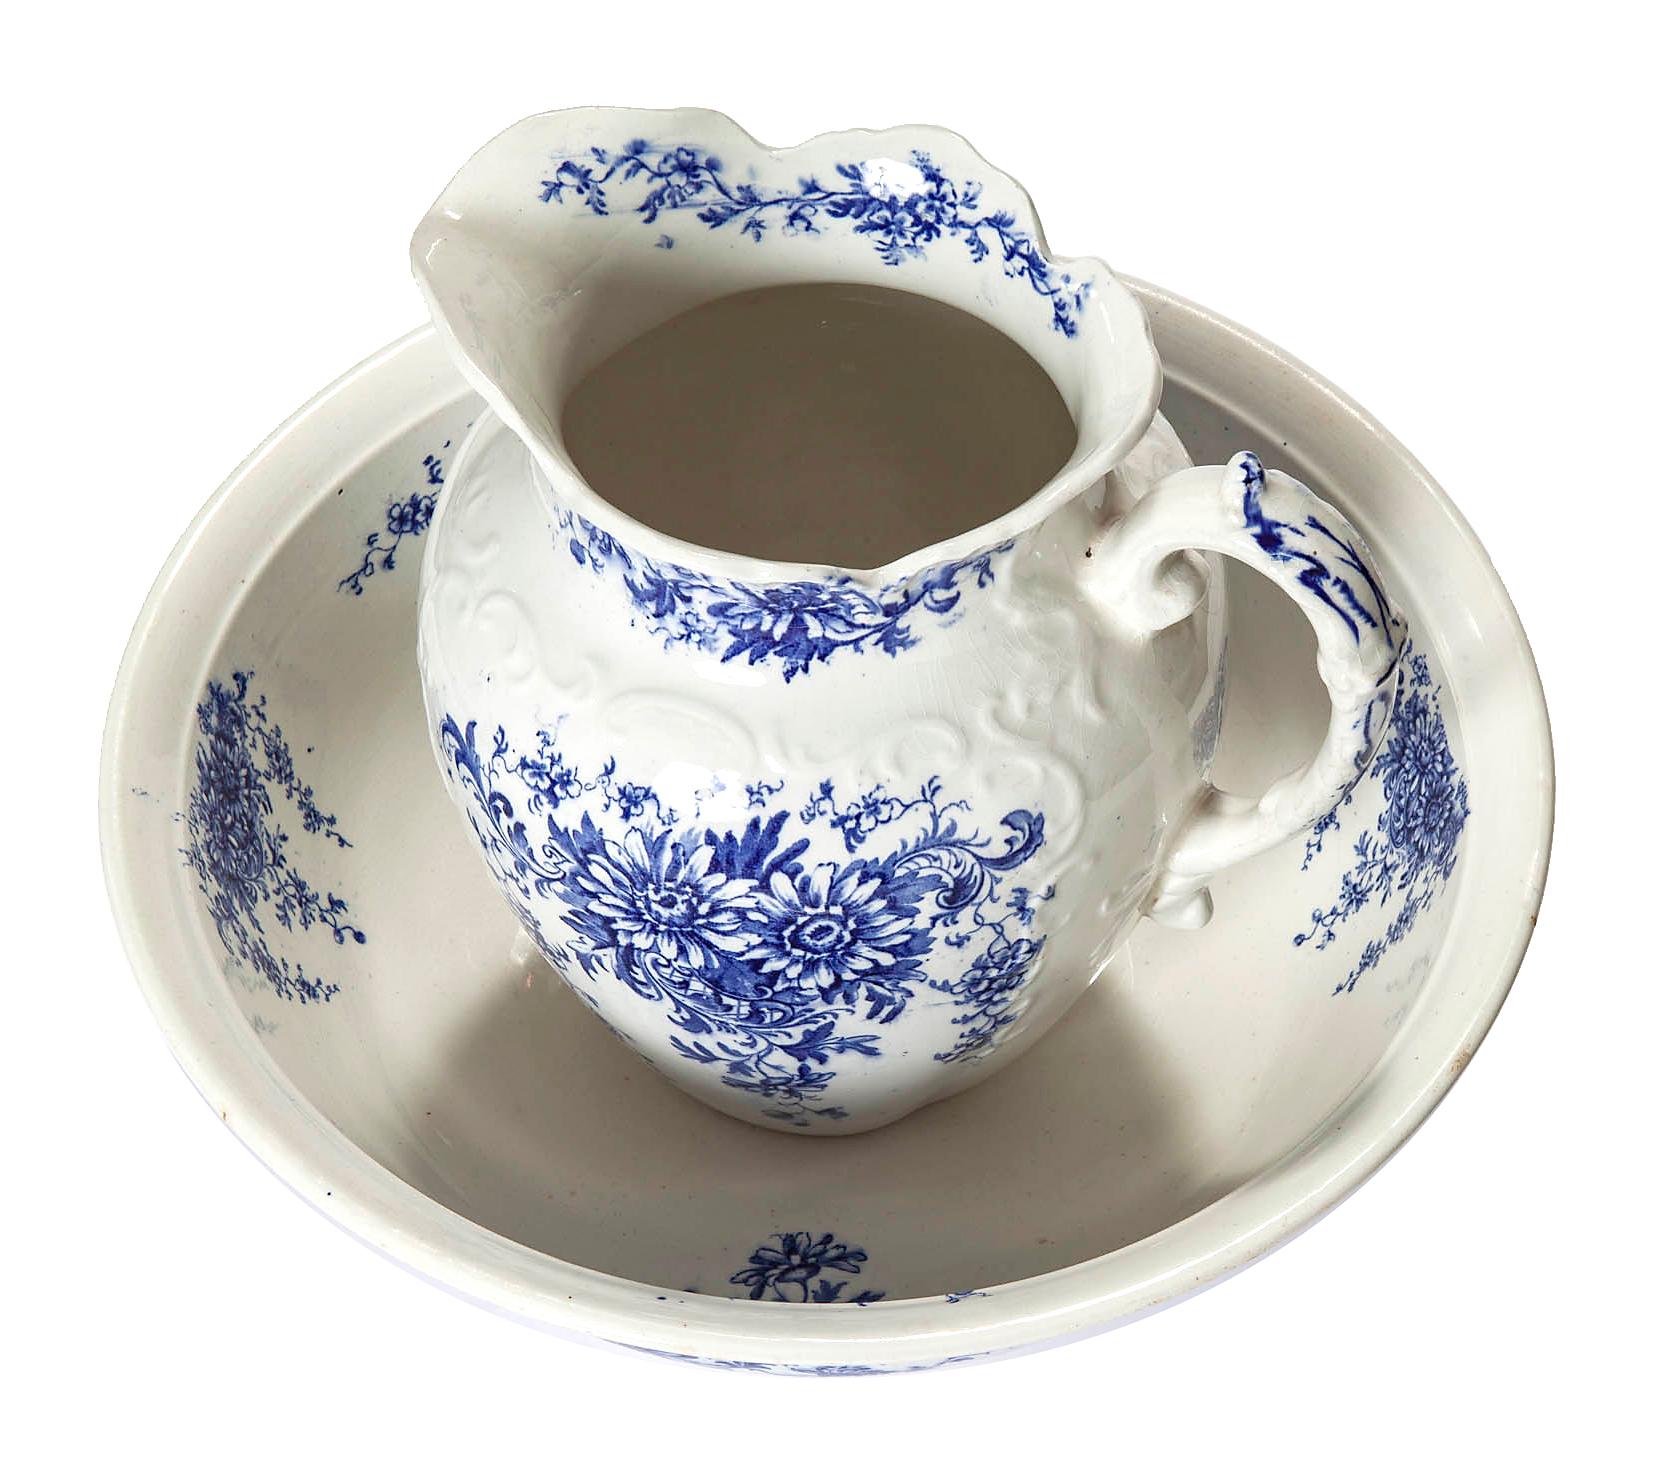 English ironstone antique blue & white bowl & pitcher set featuring a floral designs throughout.
Pitcher & bowl in perfect condition with no chips or cracks.
Both hold water.
Pitcher 12x12x10